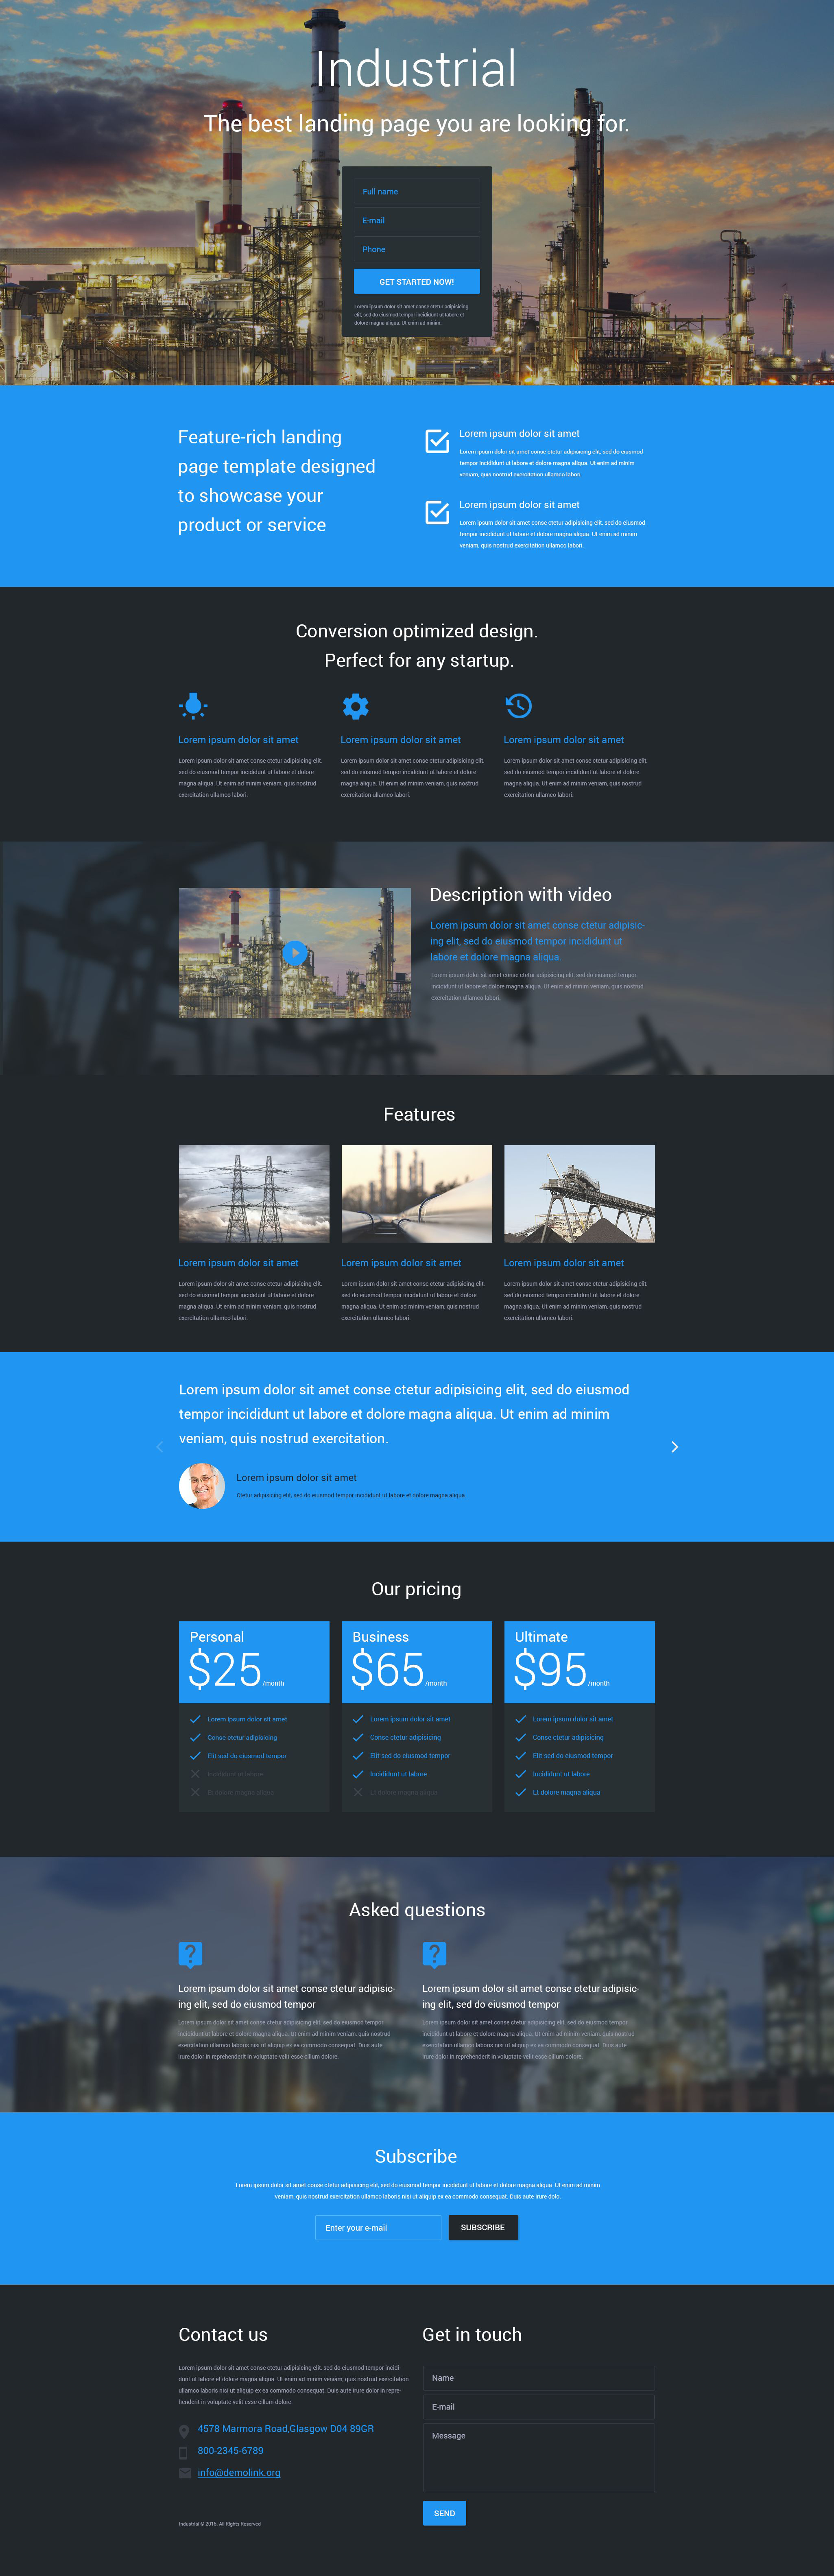 Industrial Responsive Landing Page Template